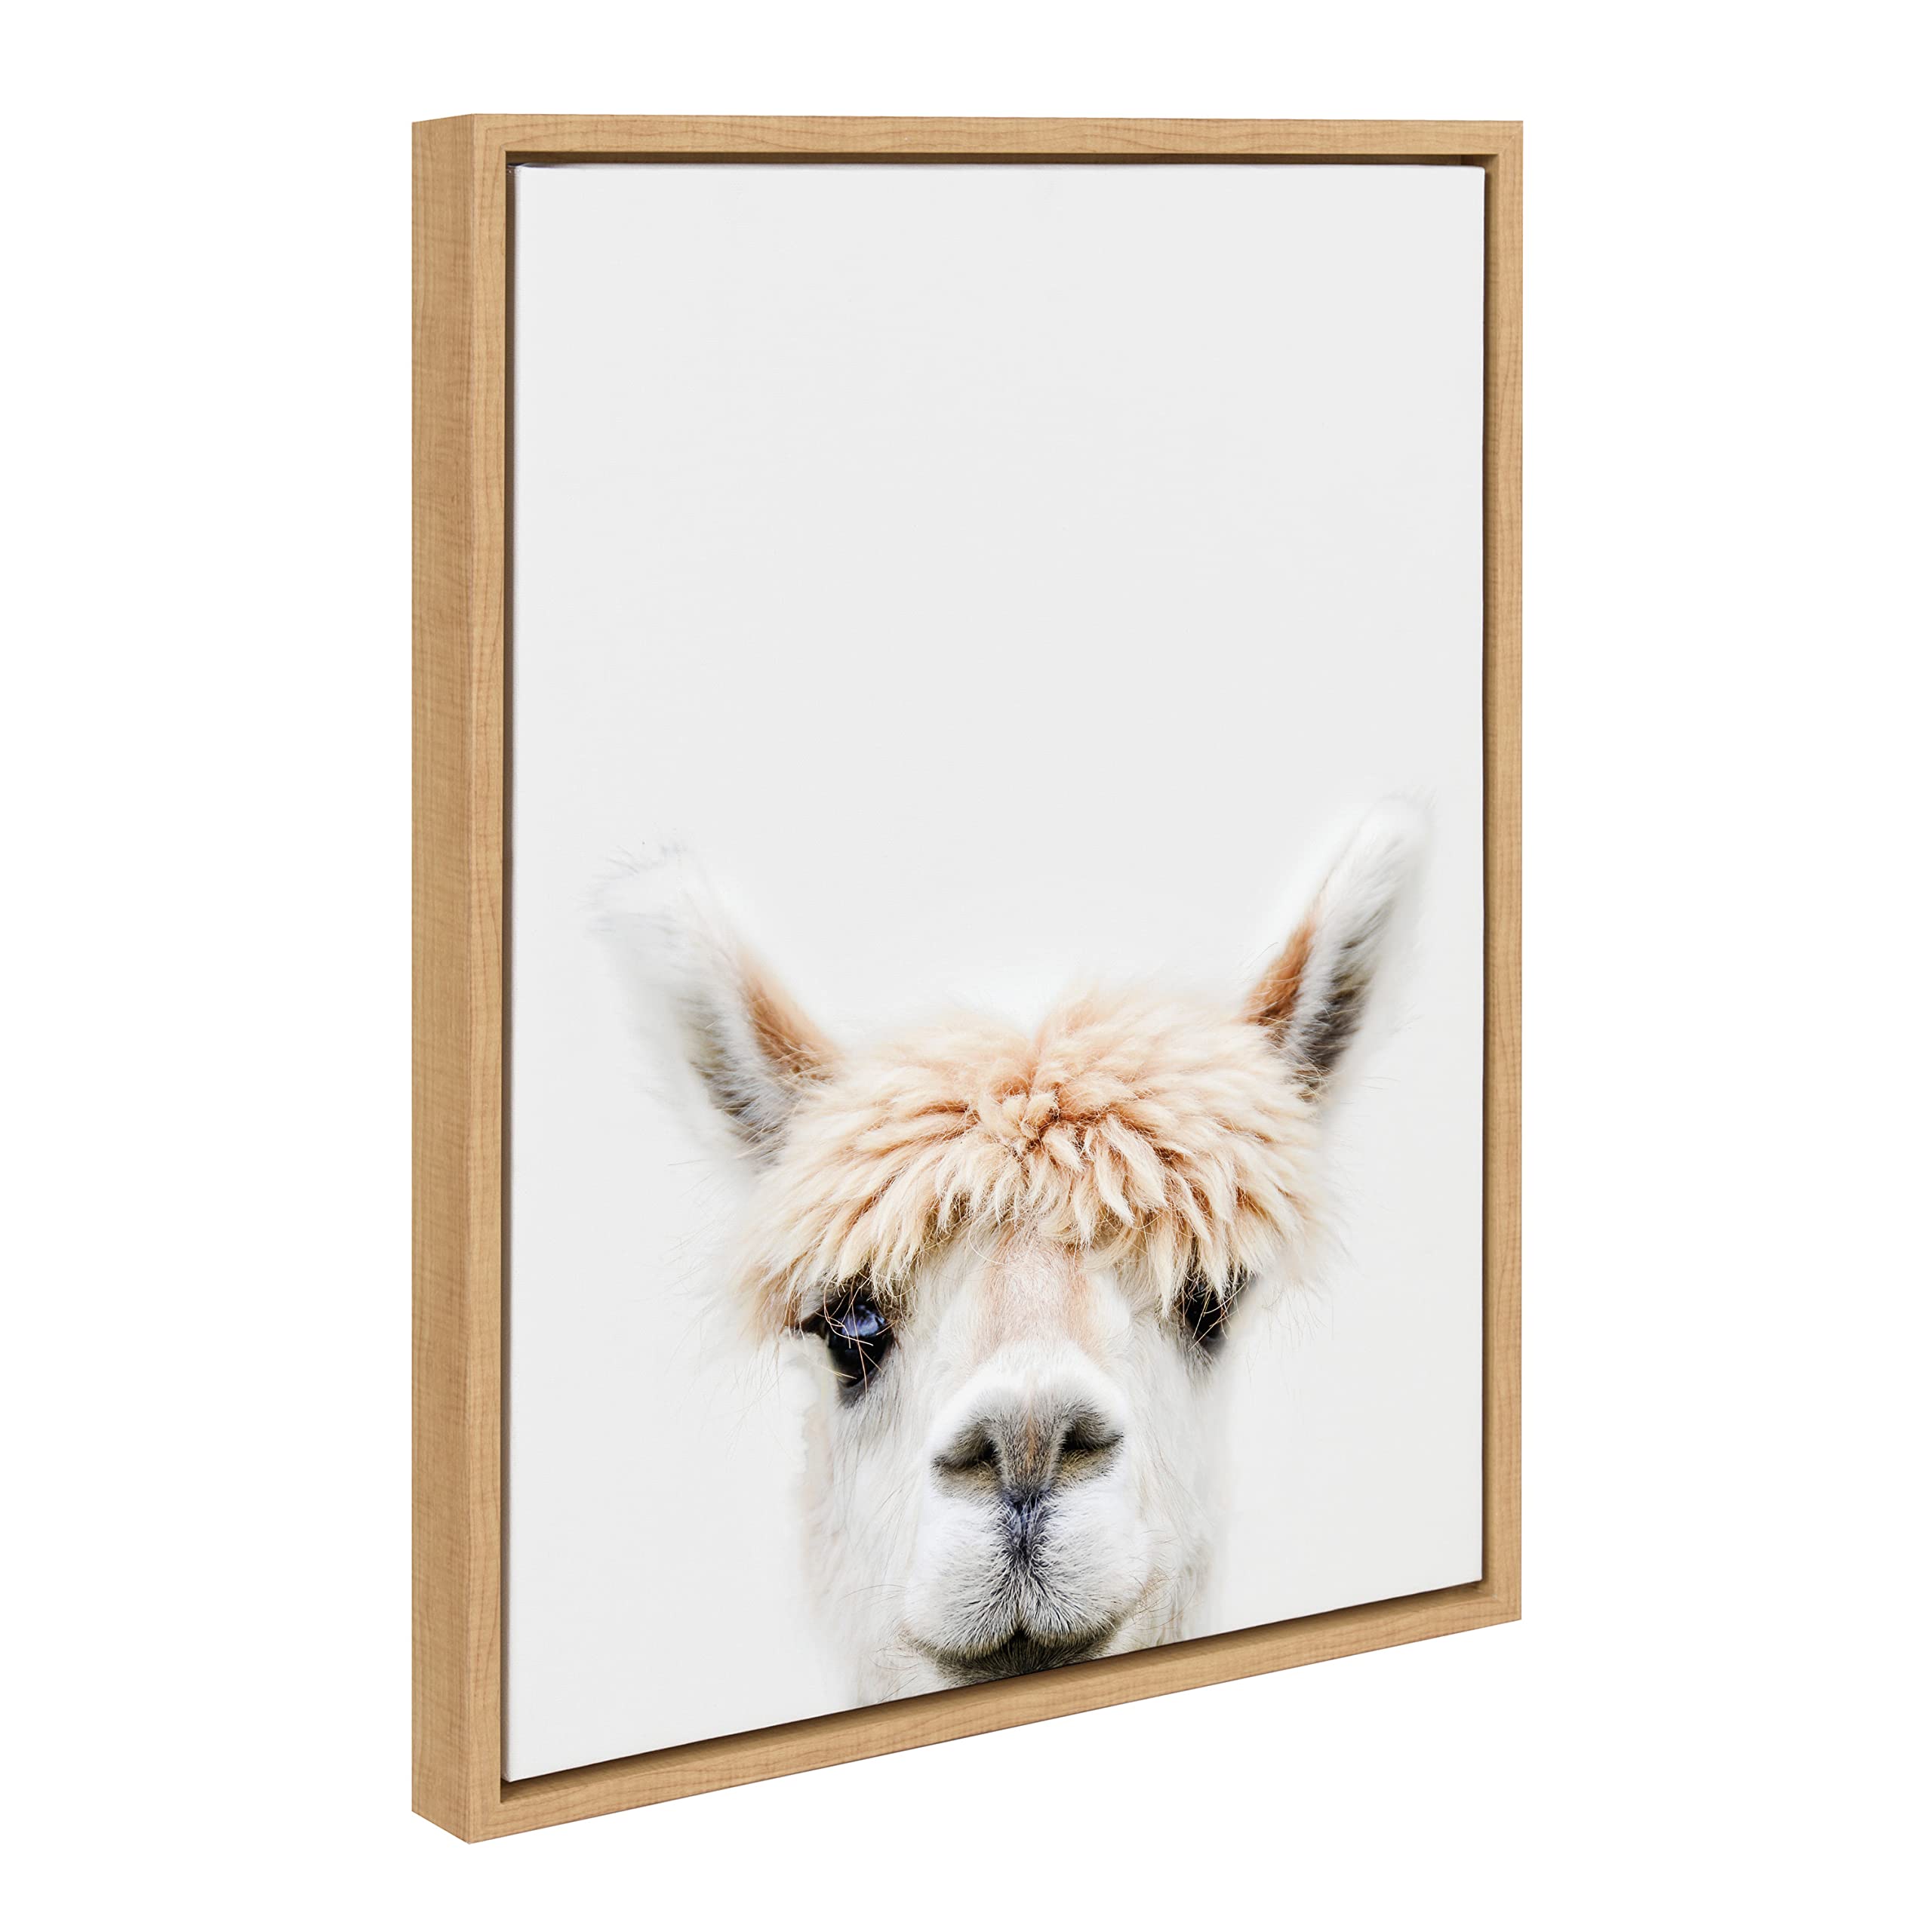 Kate and Laurel Sylvie Alpaca Bangs Framed Canvas Wall Art by Amy Peterson Art Studio, 18x24 Natural, Decorative Adorable Animal Art for Wall